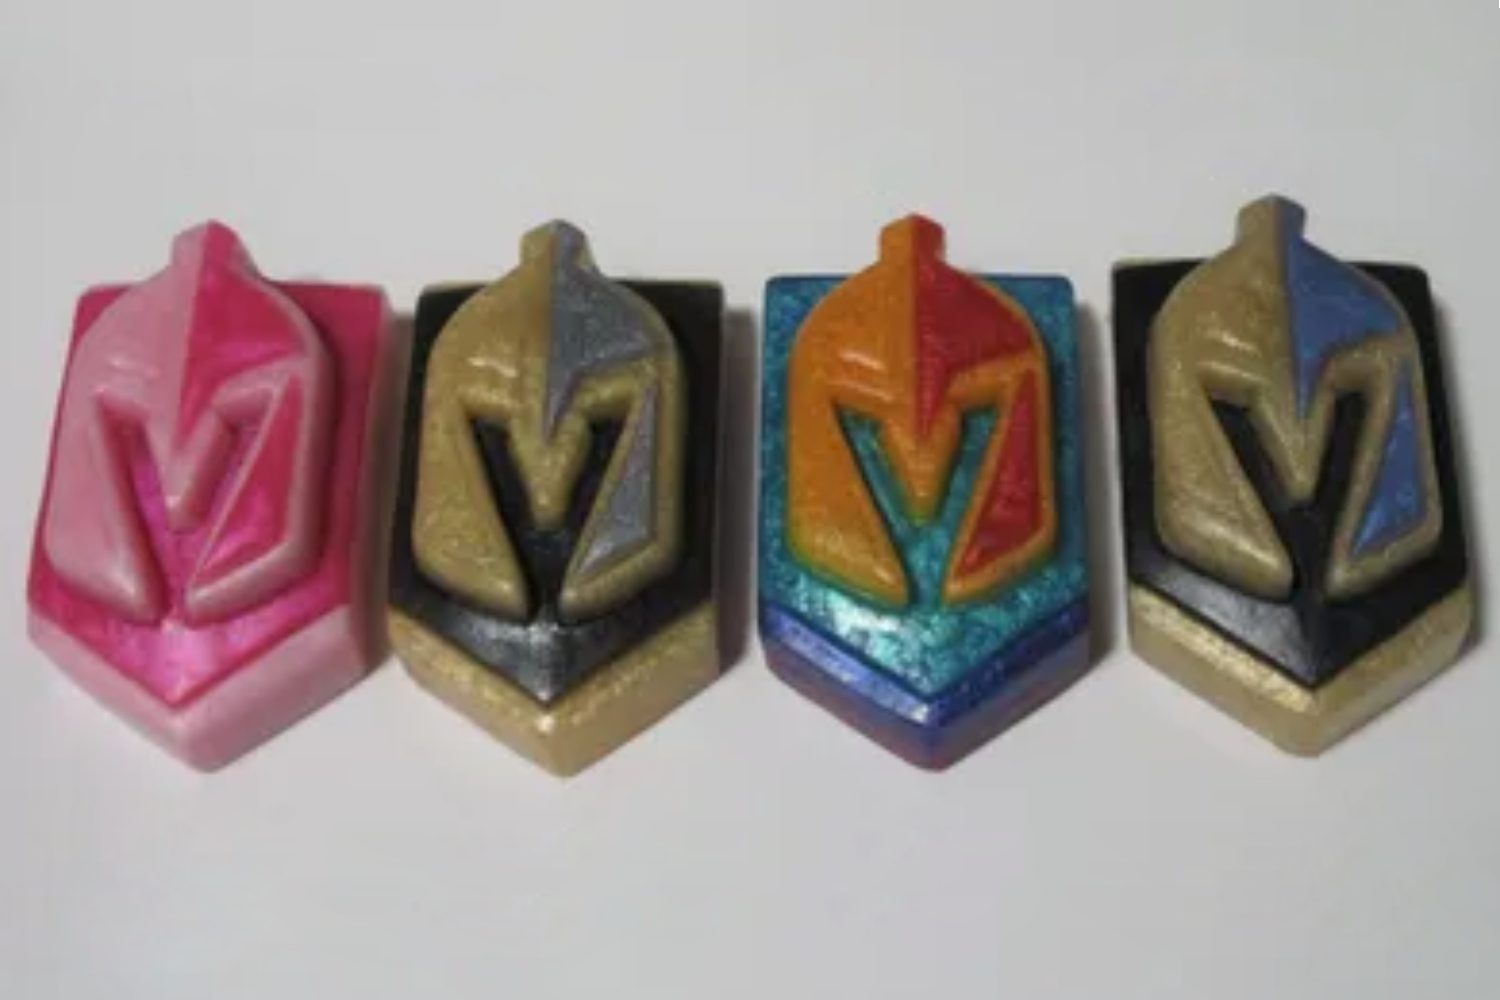 A group of four toy blocks with the letter v on them.